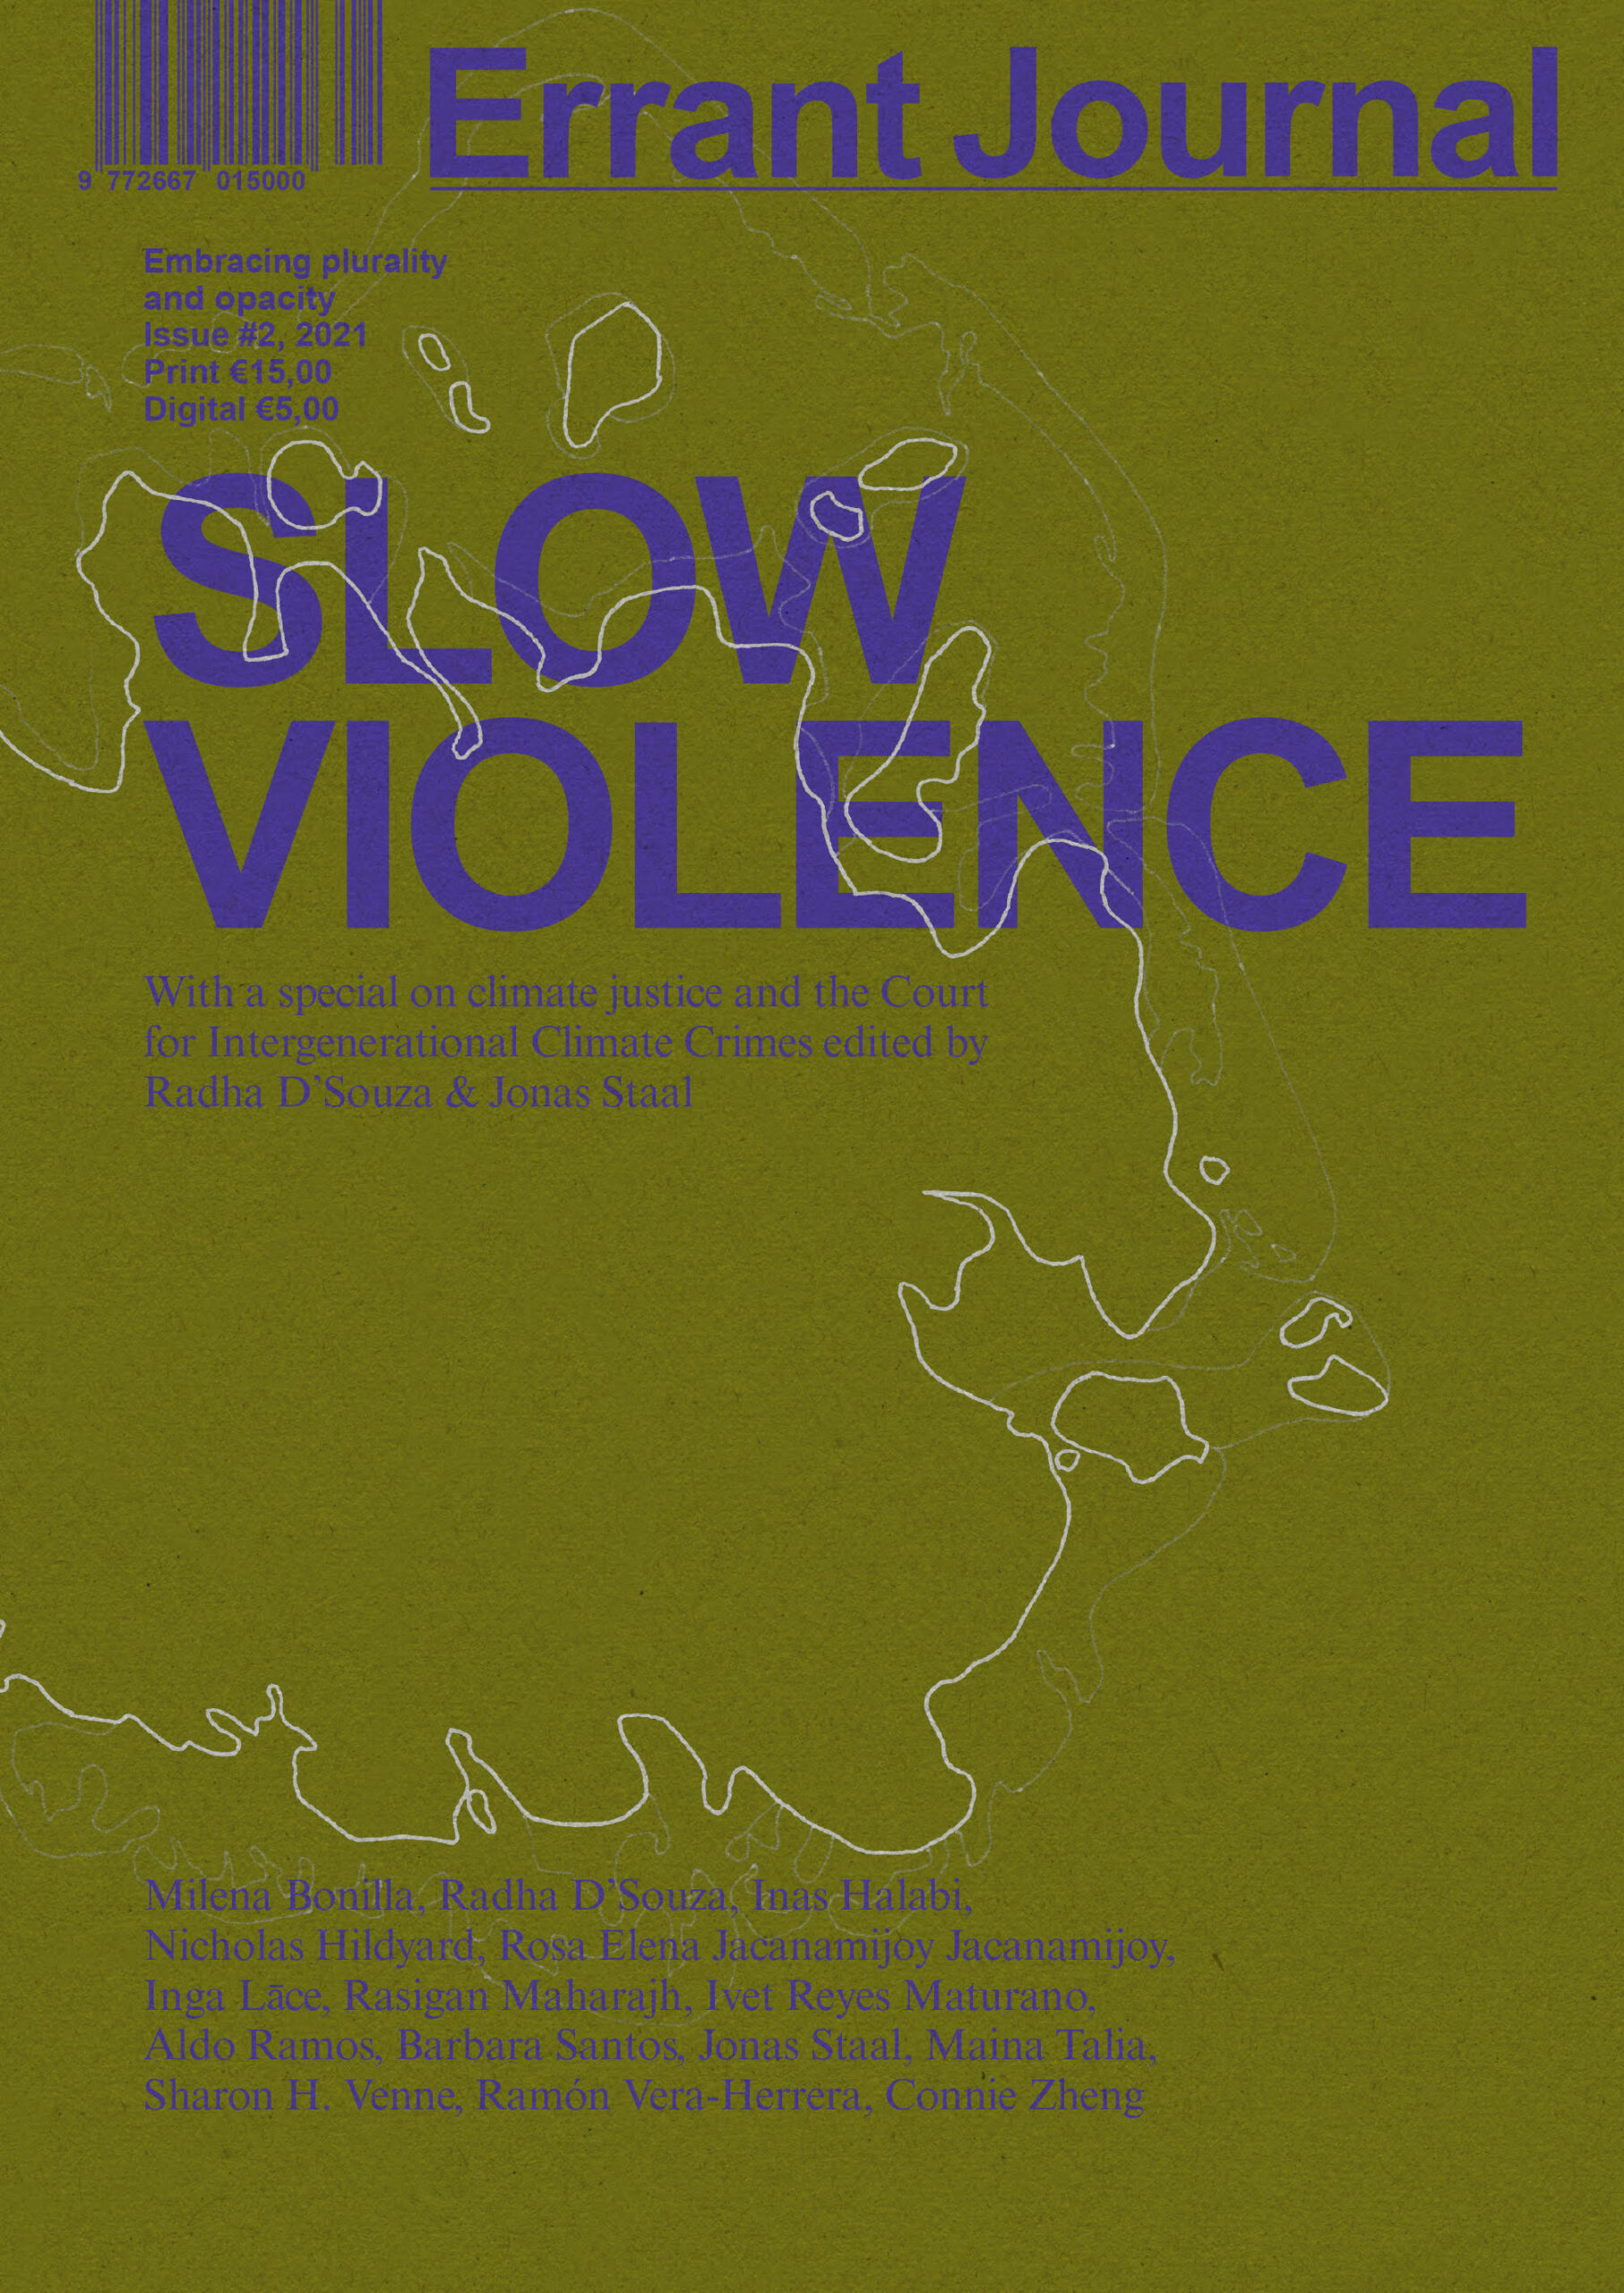 Cover of Errant Journal No. 2 Slow Violence